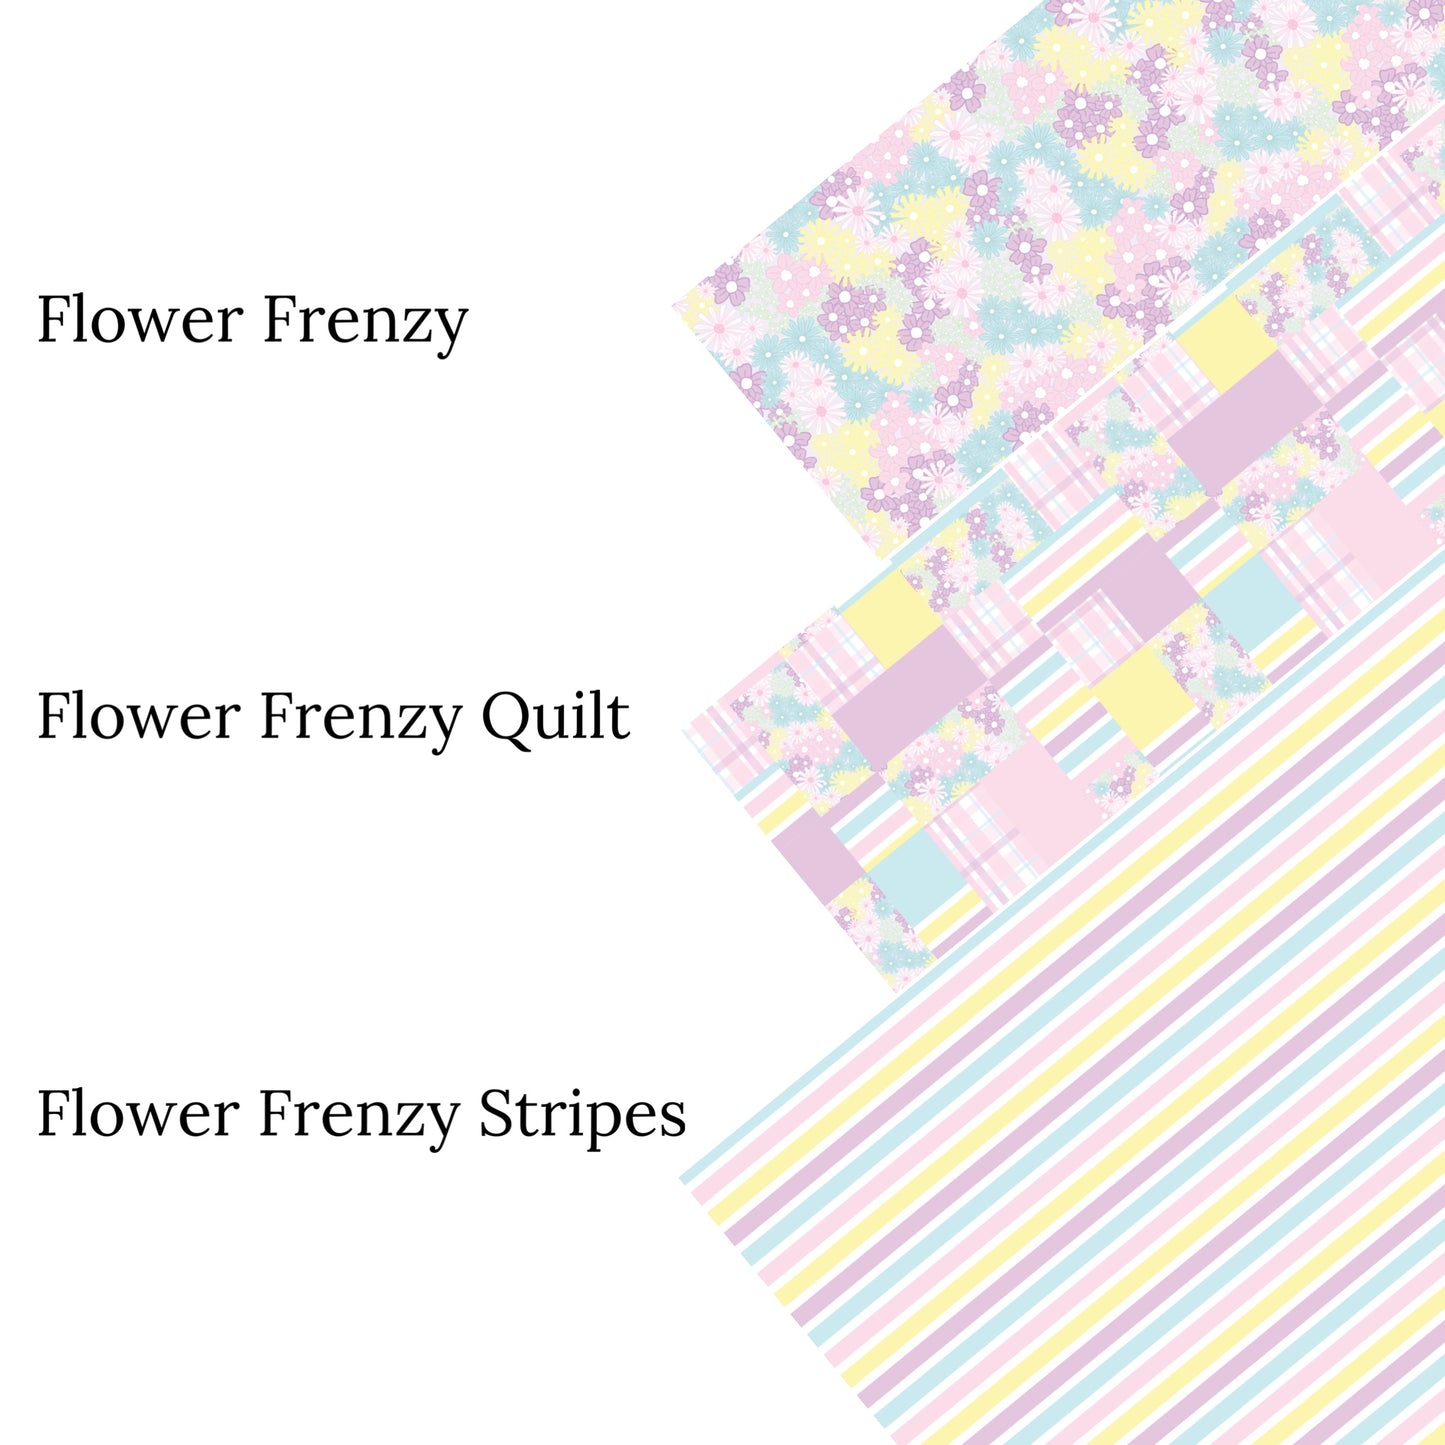 Flower Frenzy Quilt Faux Leather Sheets